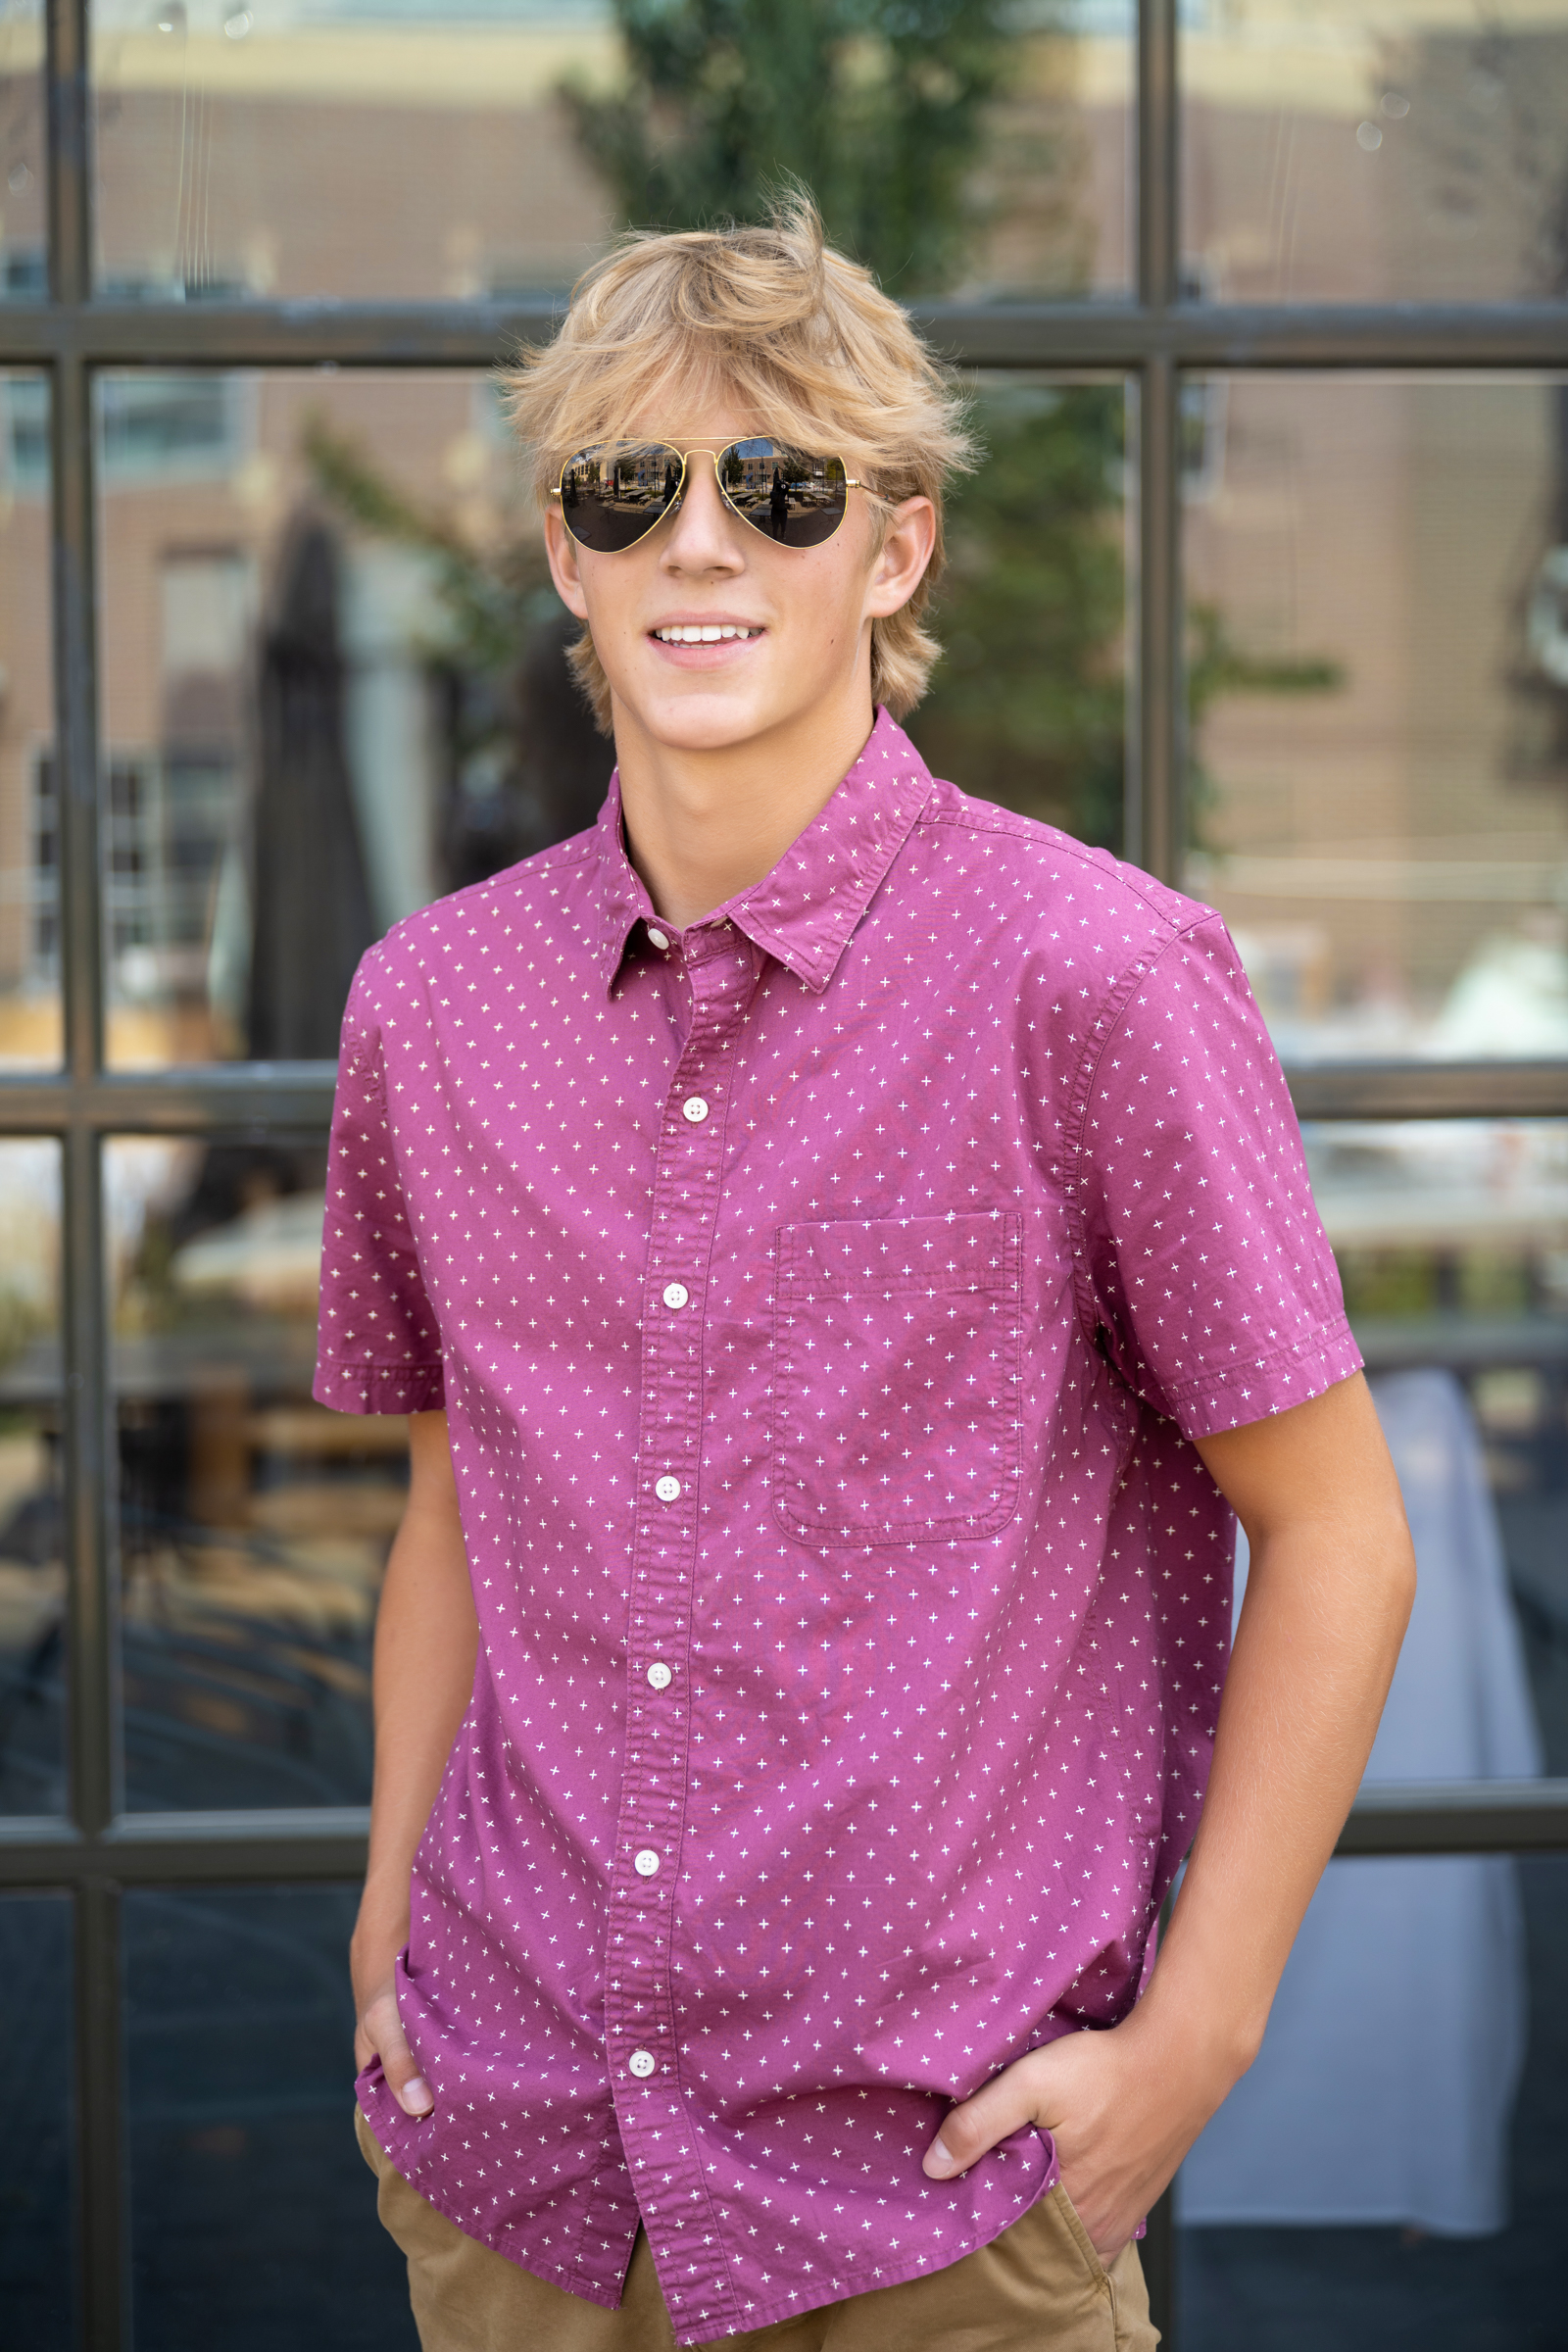 Cole wearing aviator sunglasses at the Iowa City Pedestrian mall for his senior pictures